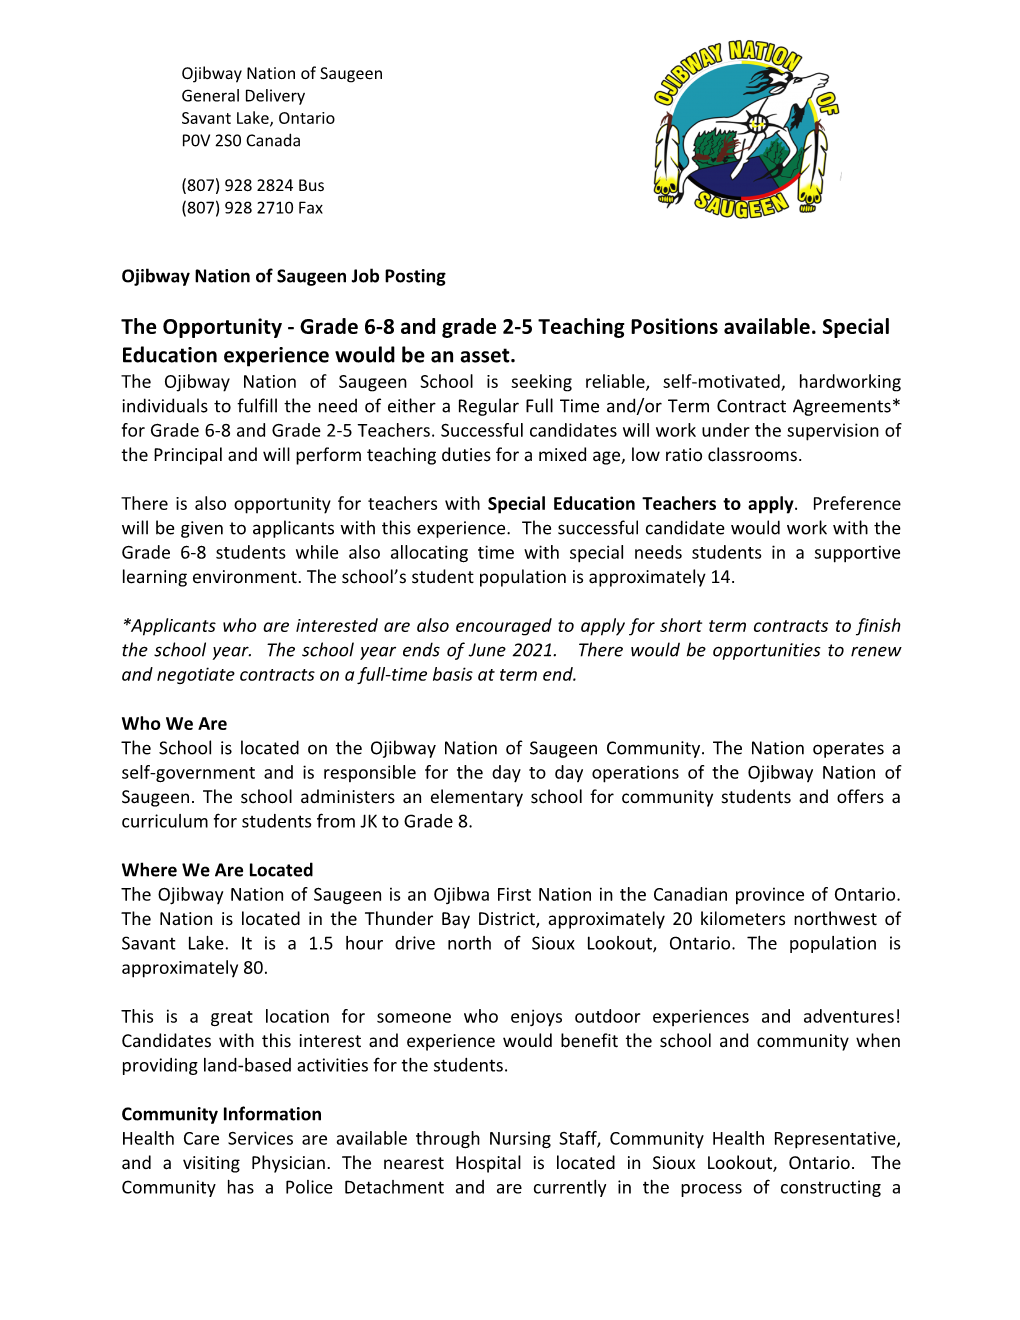 The Opportunity - Grade 6-8 and Grade 2-5 Teaching Positions Available